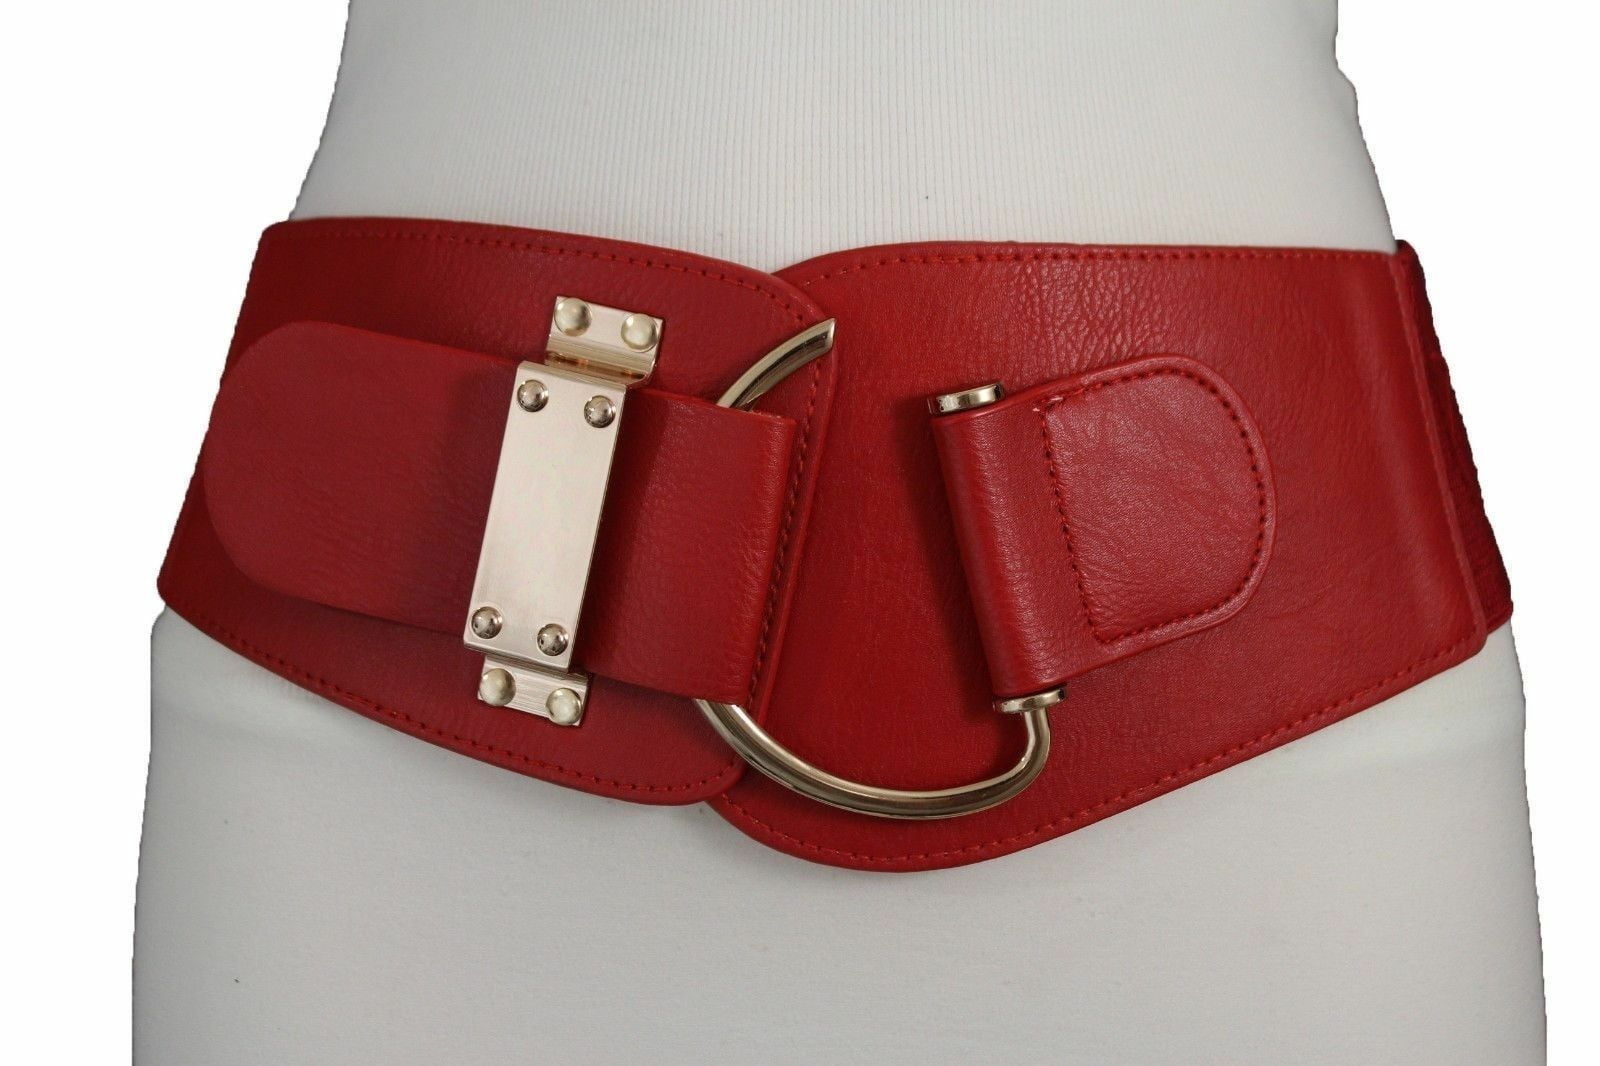 Faux leather red elastic wide belt with flowers in middle size S M L XL 